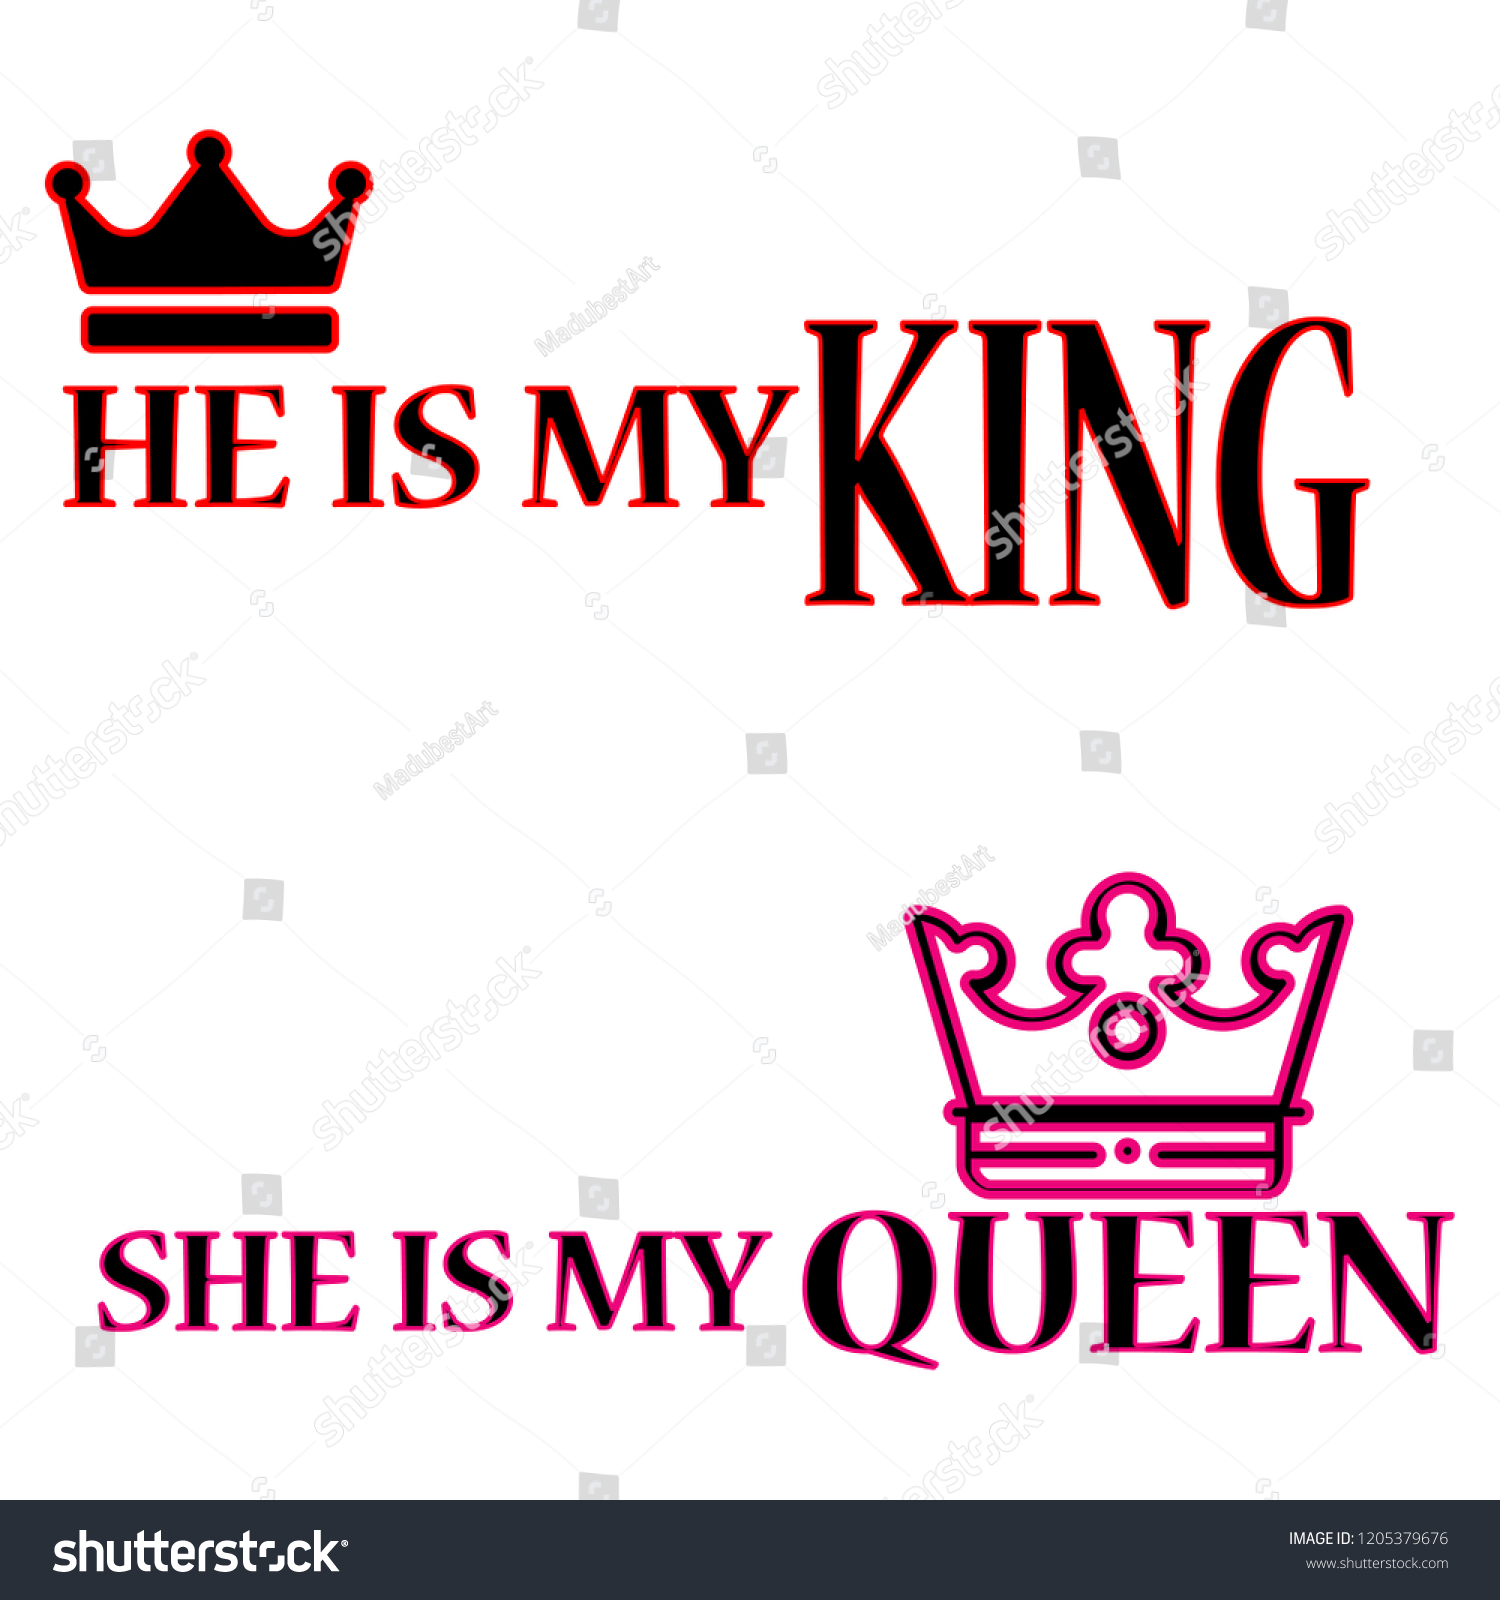 Couple T Shirt Designhe King She Stock Image Download Now